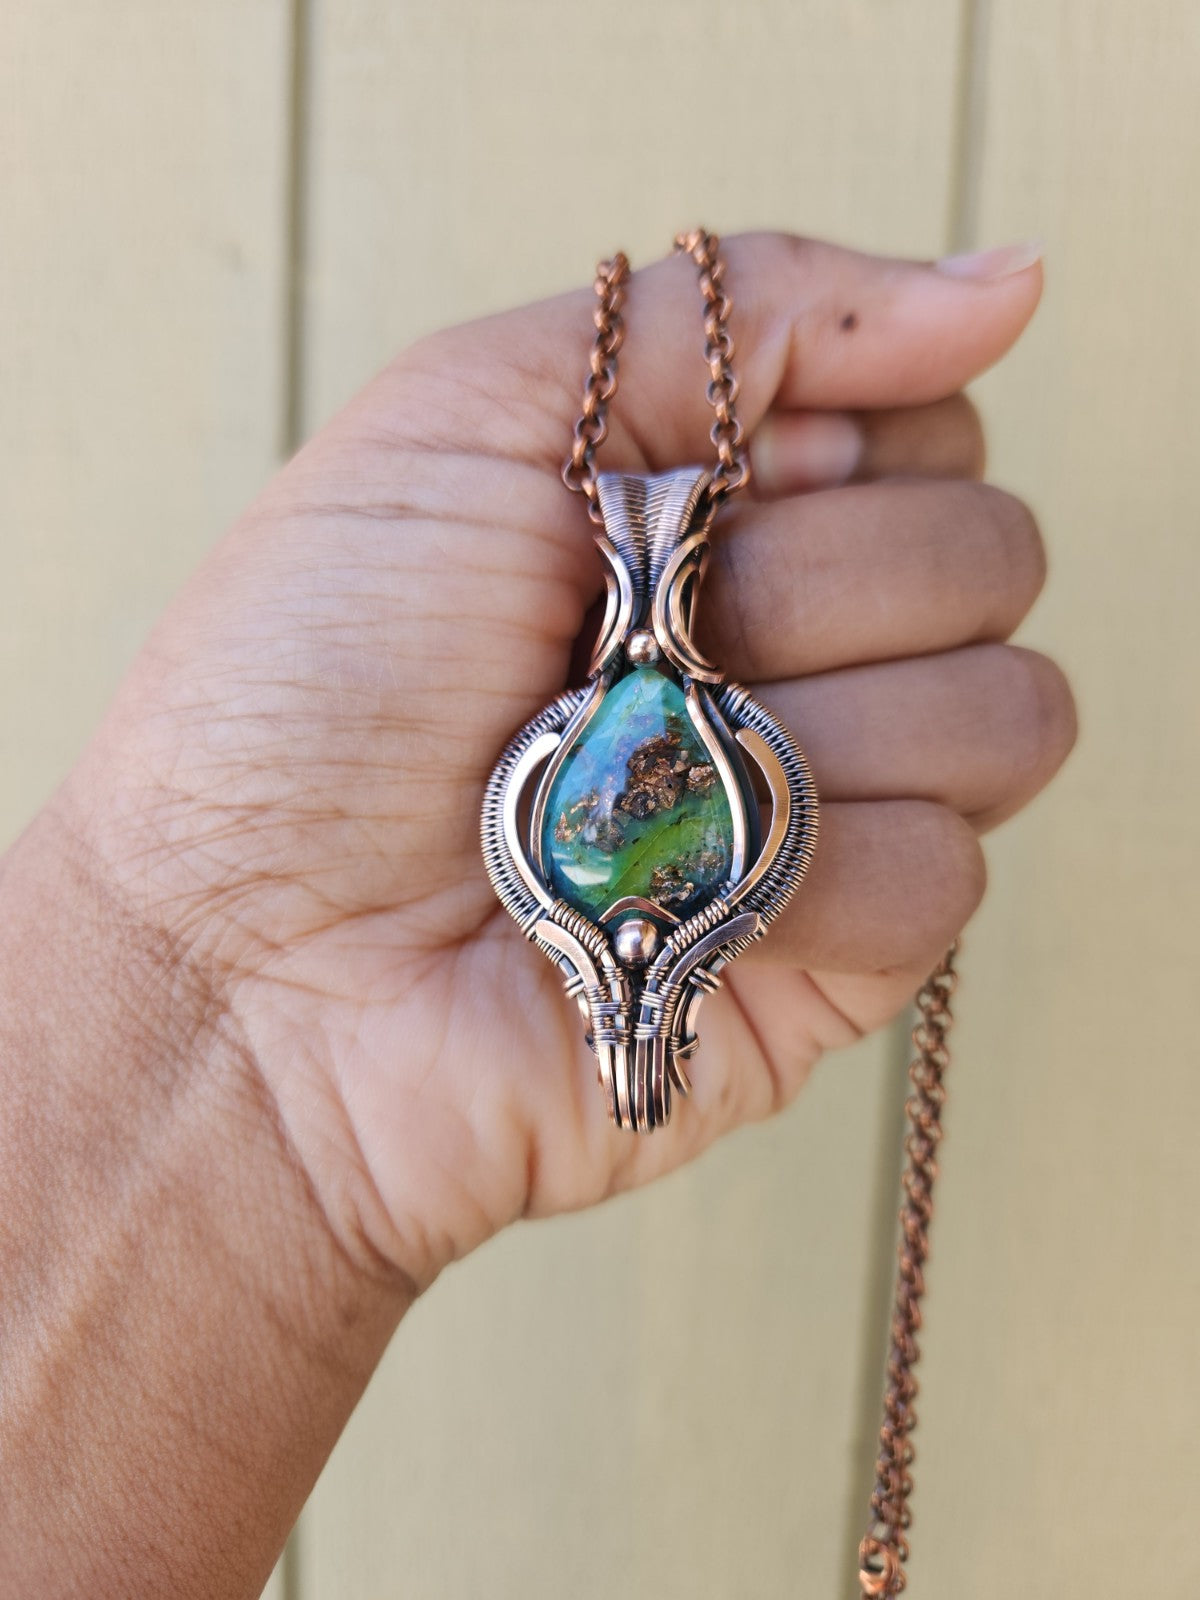 Petrified Opalized Wood with Native Copper Pendant